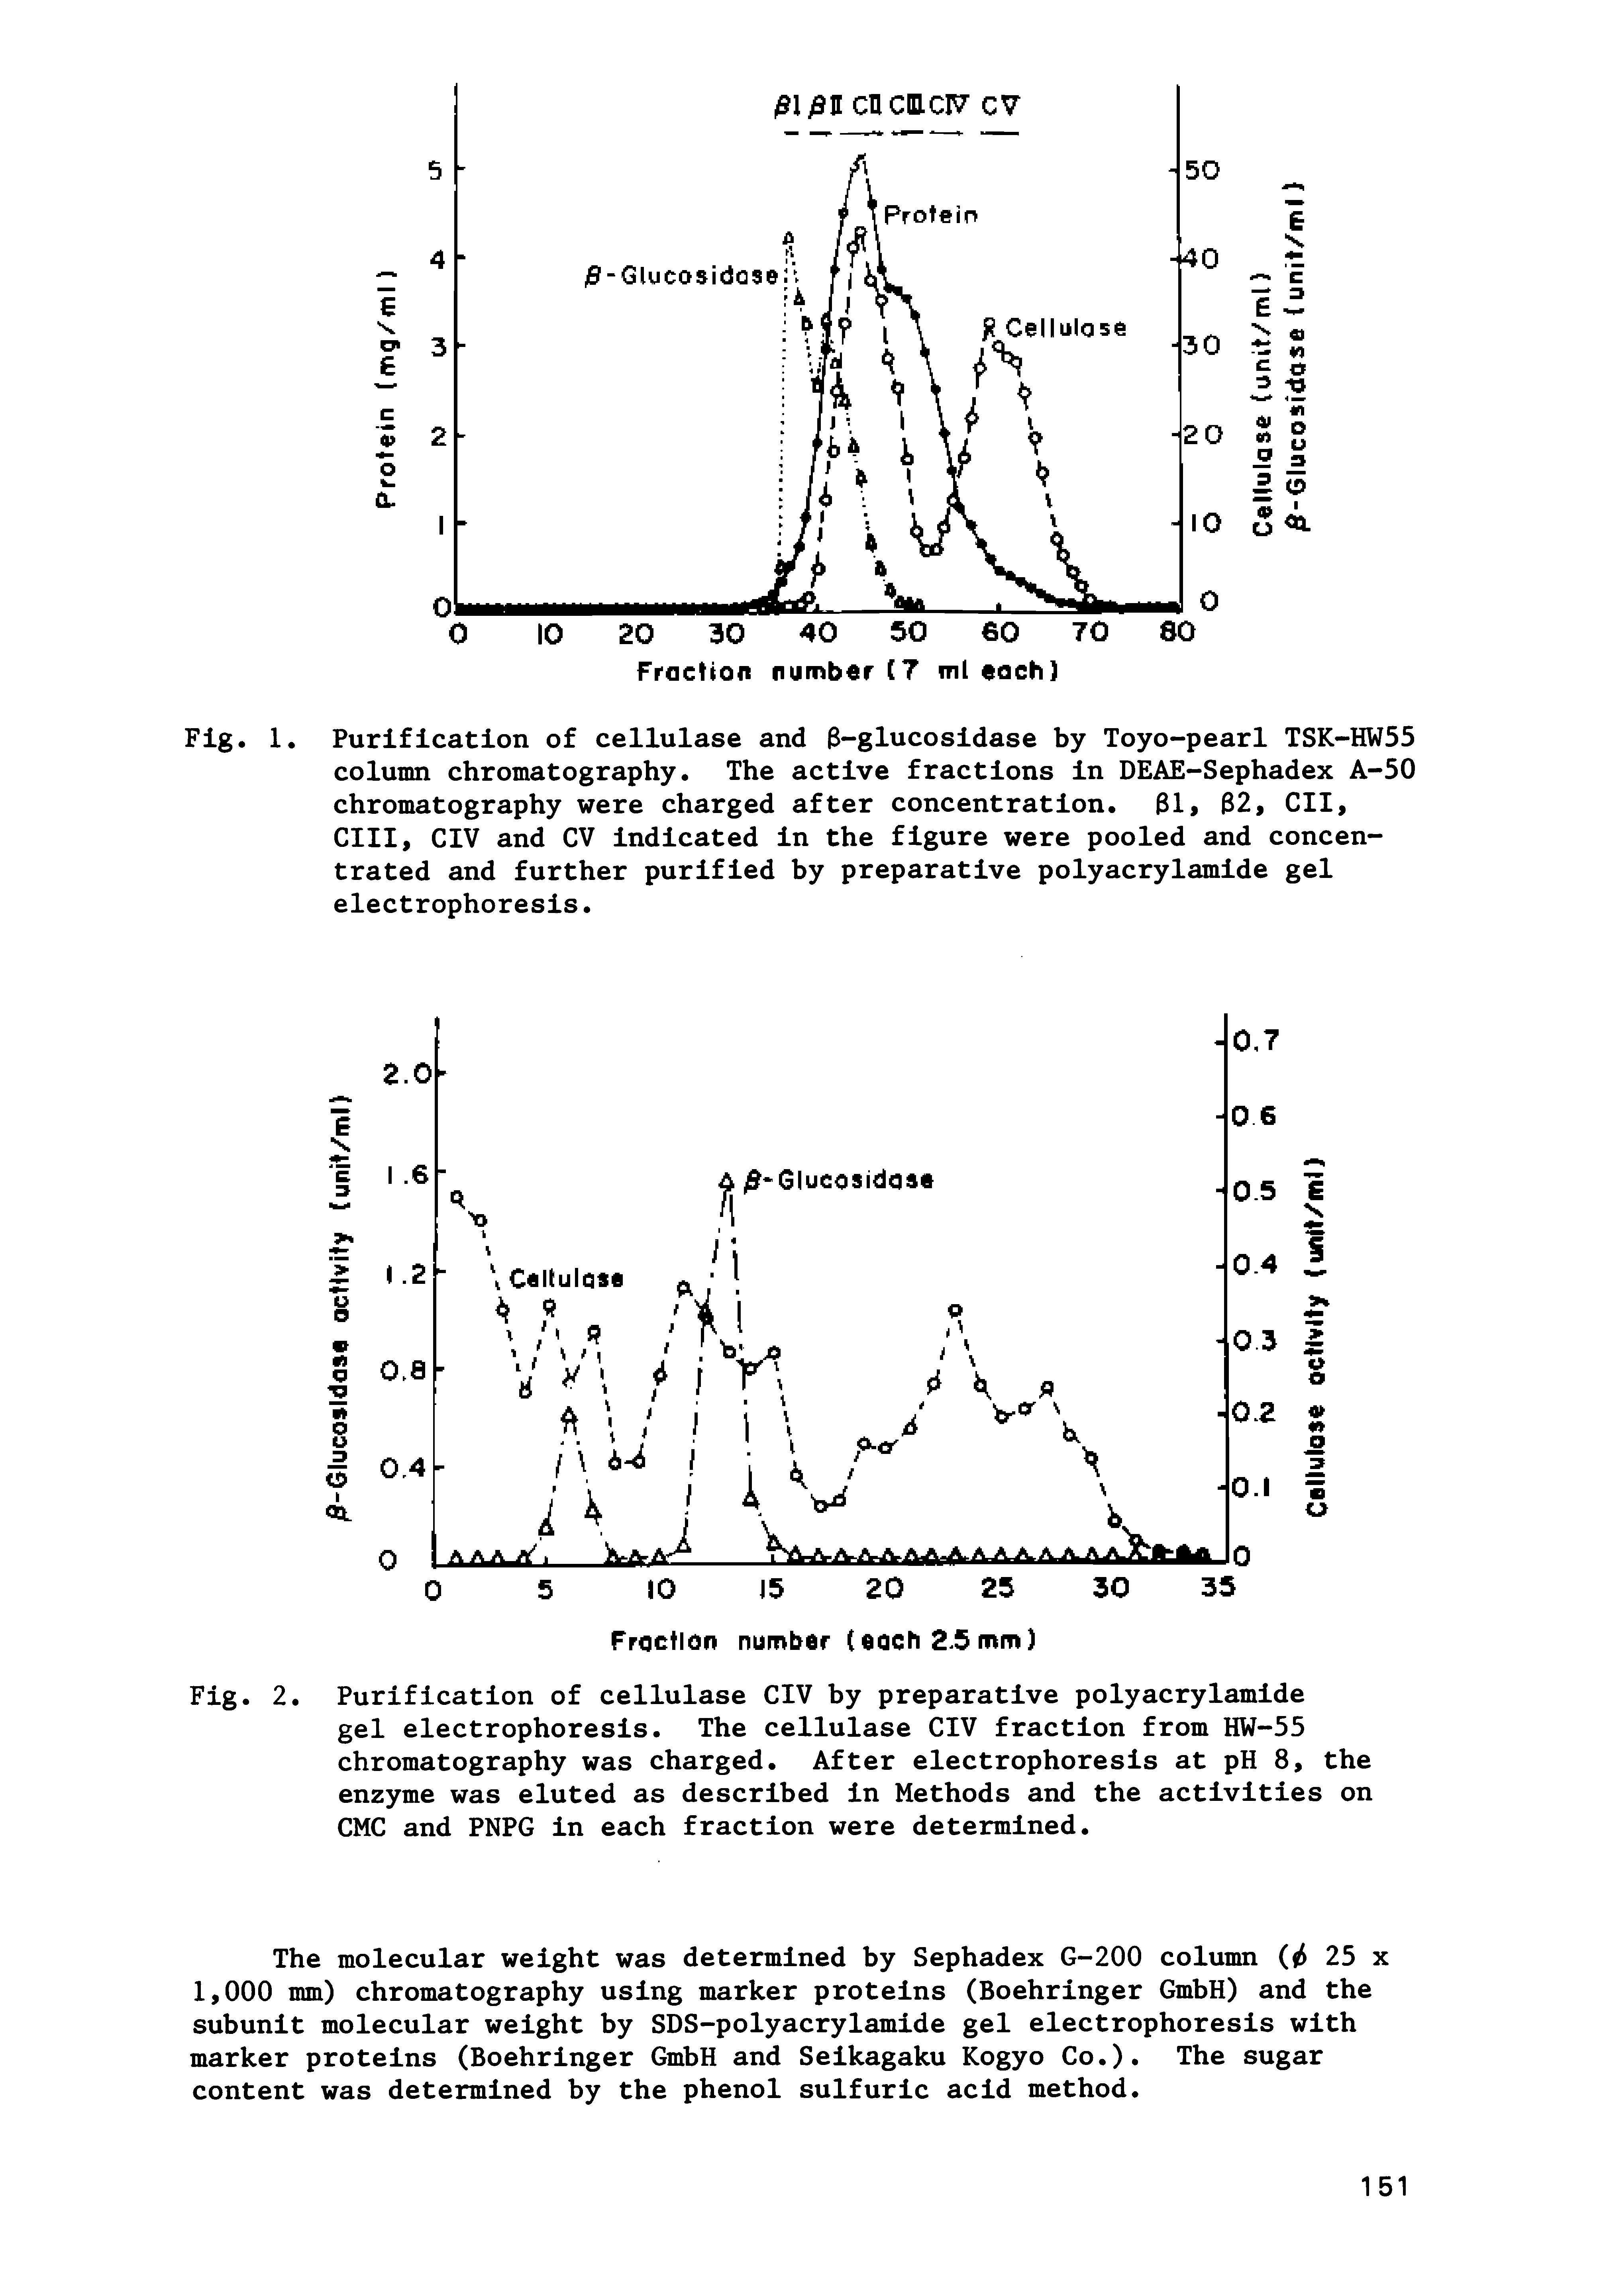 Fig. 1. Purification of cellulase and 3-glucosidase by Toyo-pearl TSK-HW55 column chromatography. The active fractions in D A Sephadex A-50 chromatography were charged after concentration. 31> 32, CII, cm, CIV and CV indicated in the figure were pooled and concentrated and further purified by preparative polyacrylamide gel electrophoresis.